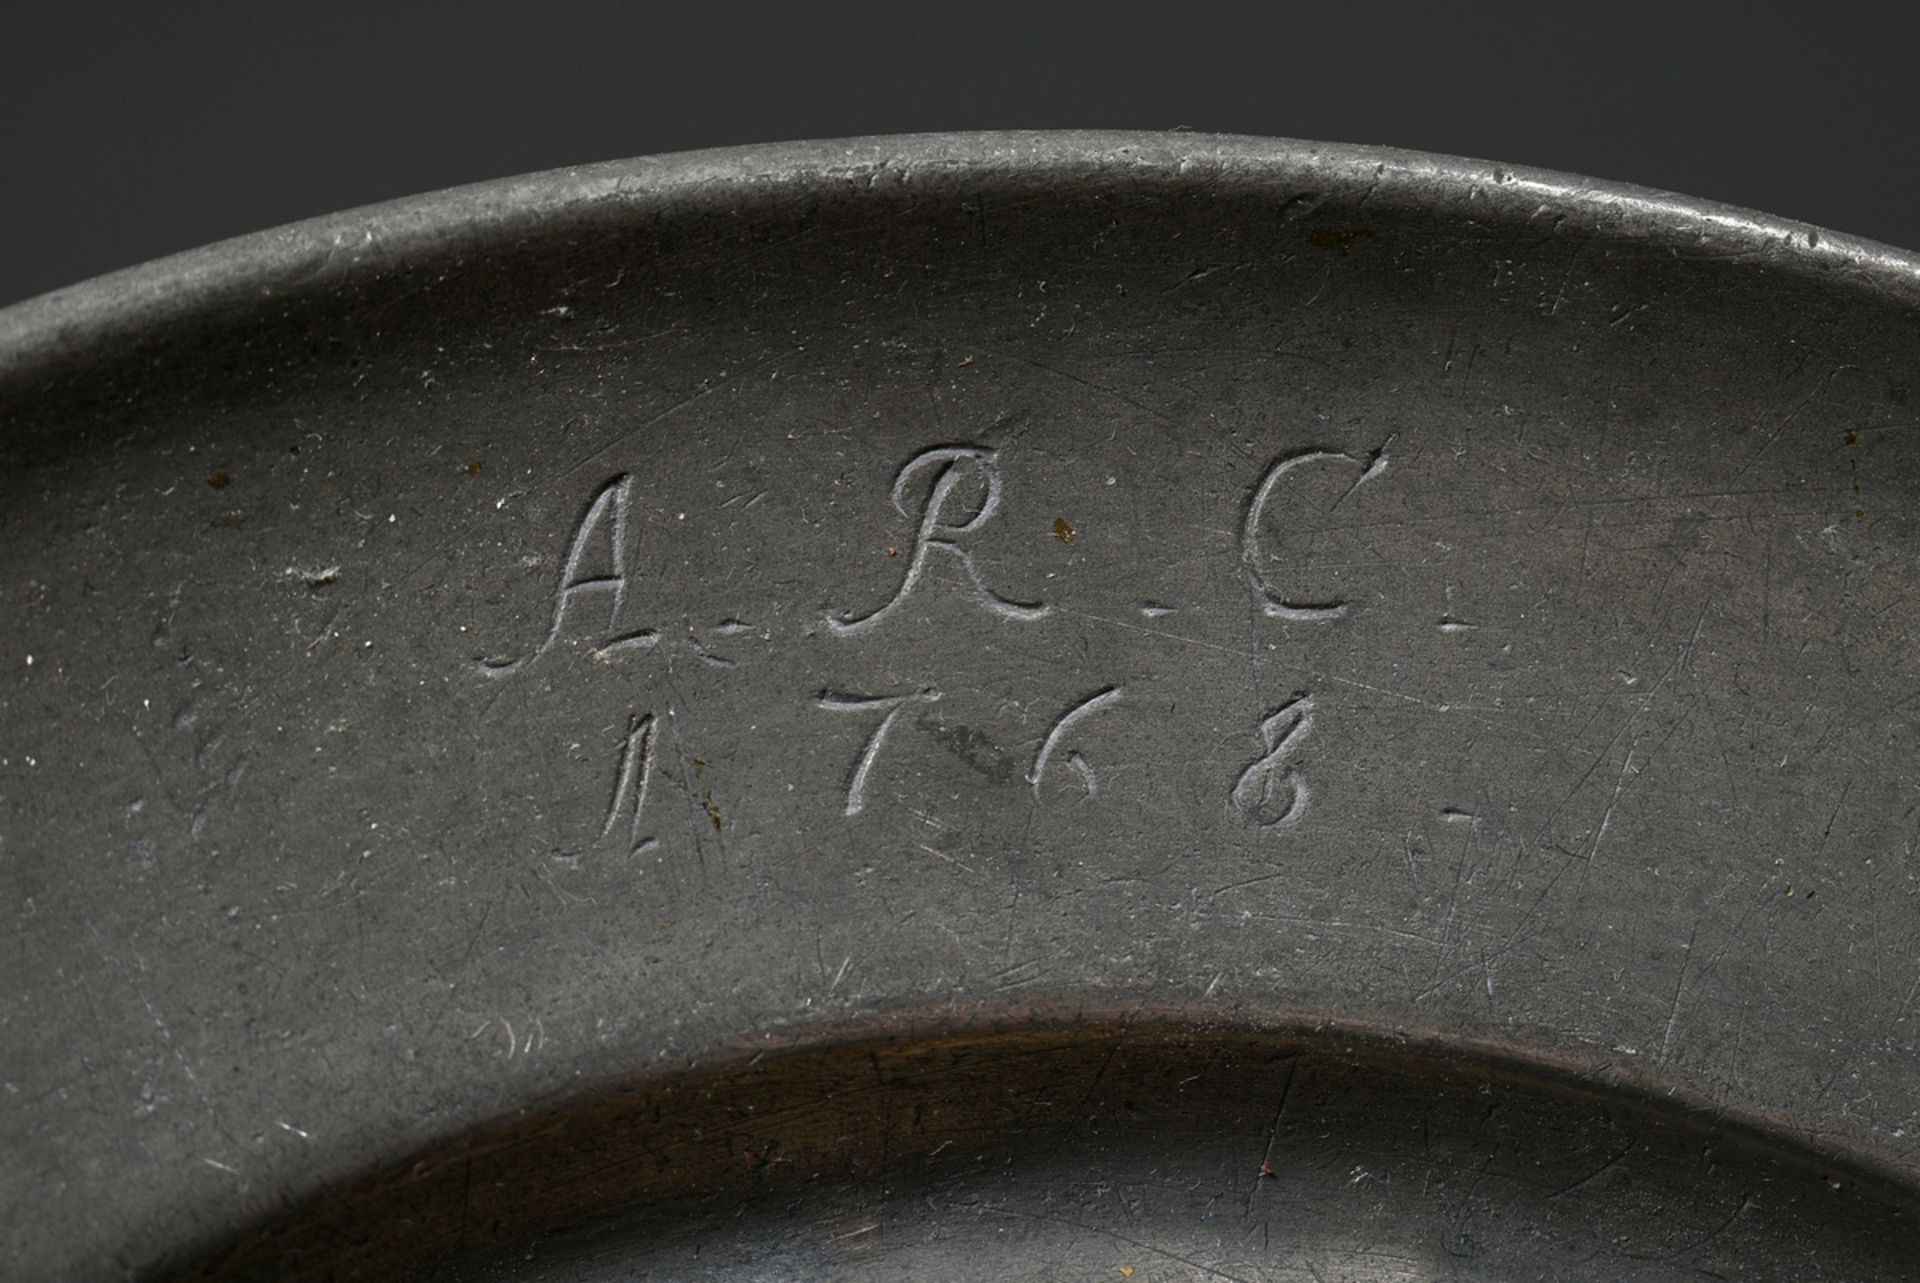 3 Various pieces of pewter, 18th century: large plate with engraved owner's monogram "C.S.S. 1775", - Image 3 of 11